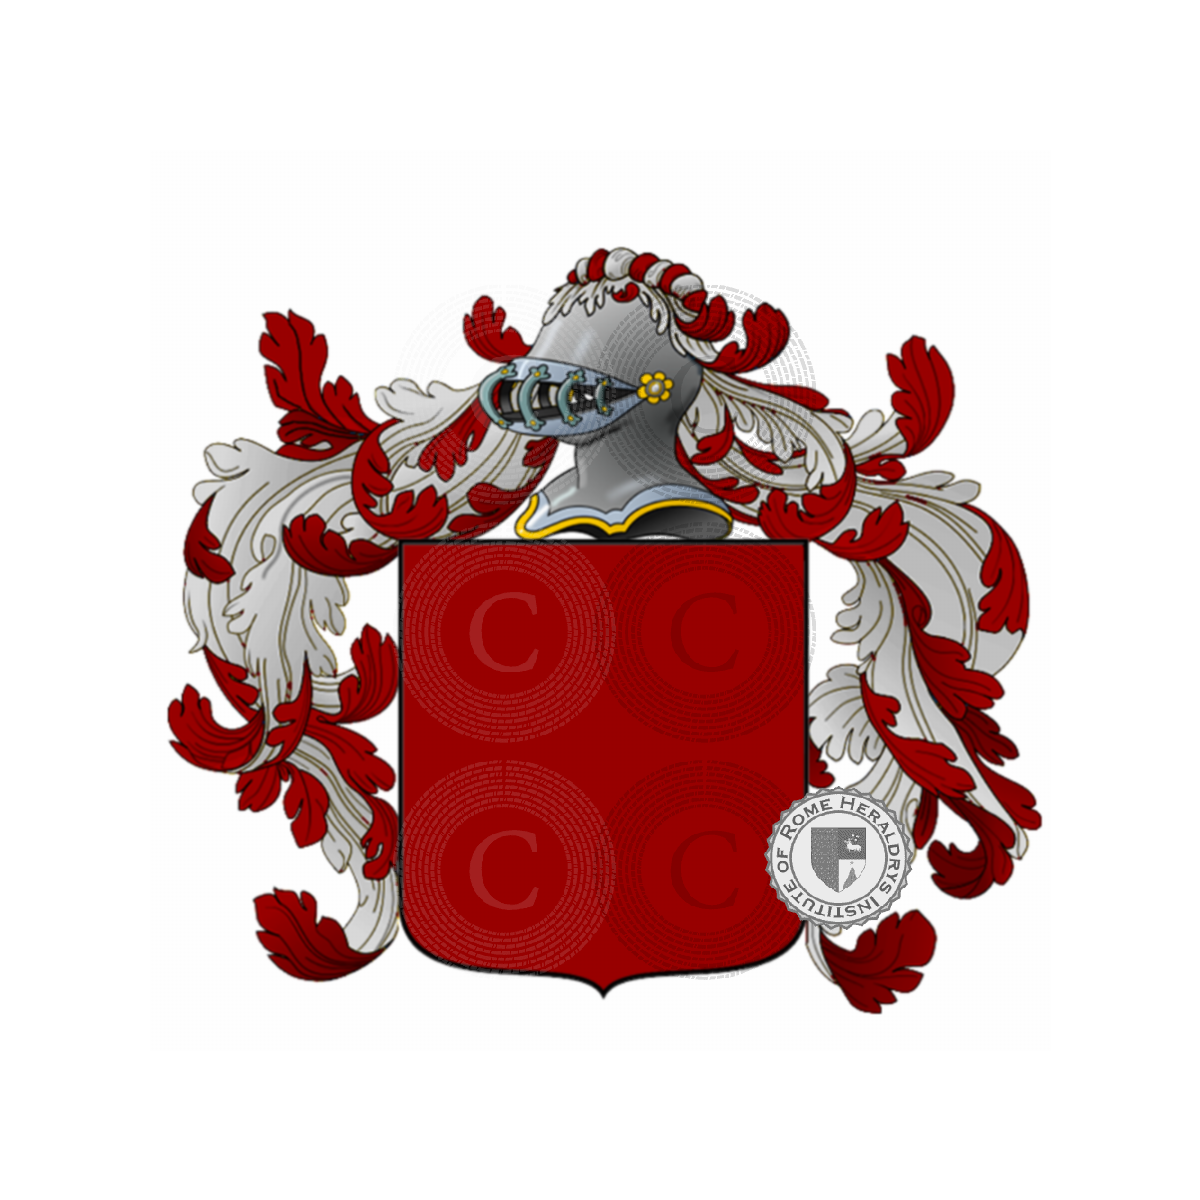 Coat of arms of familynarbona